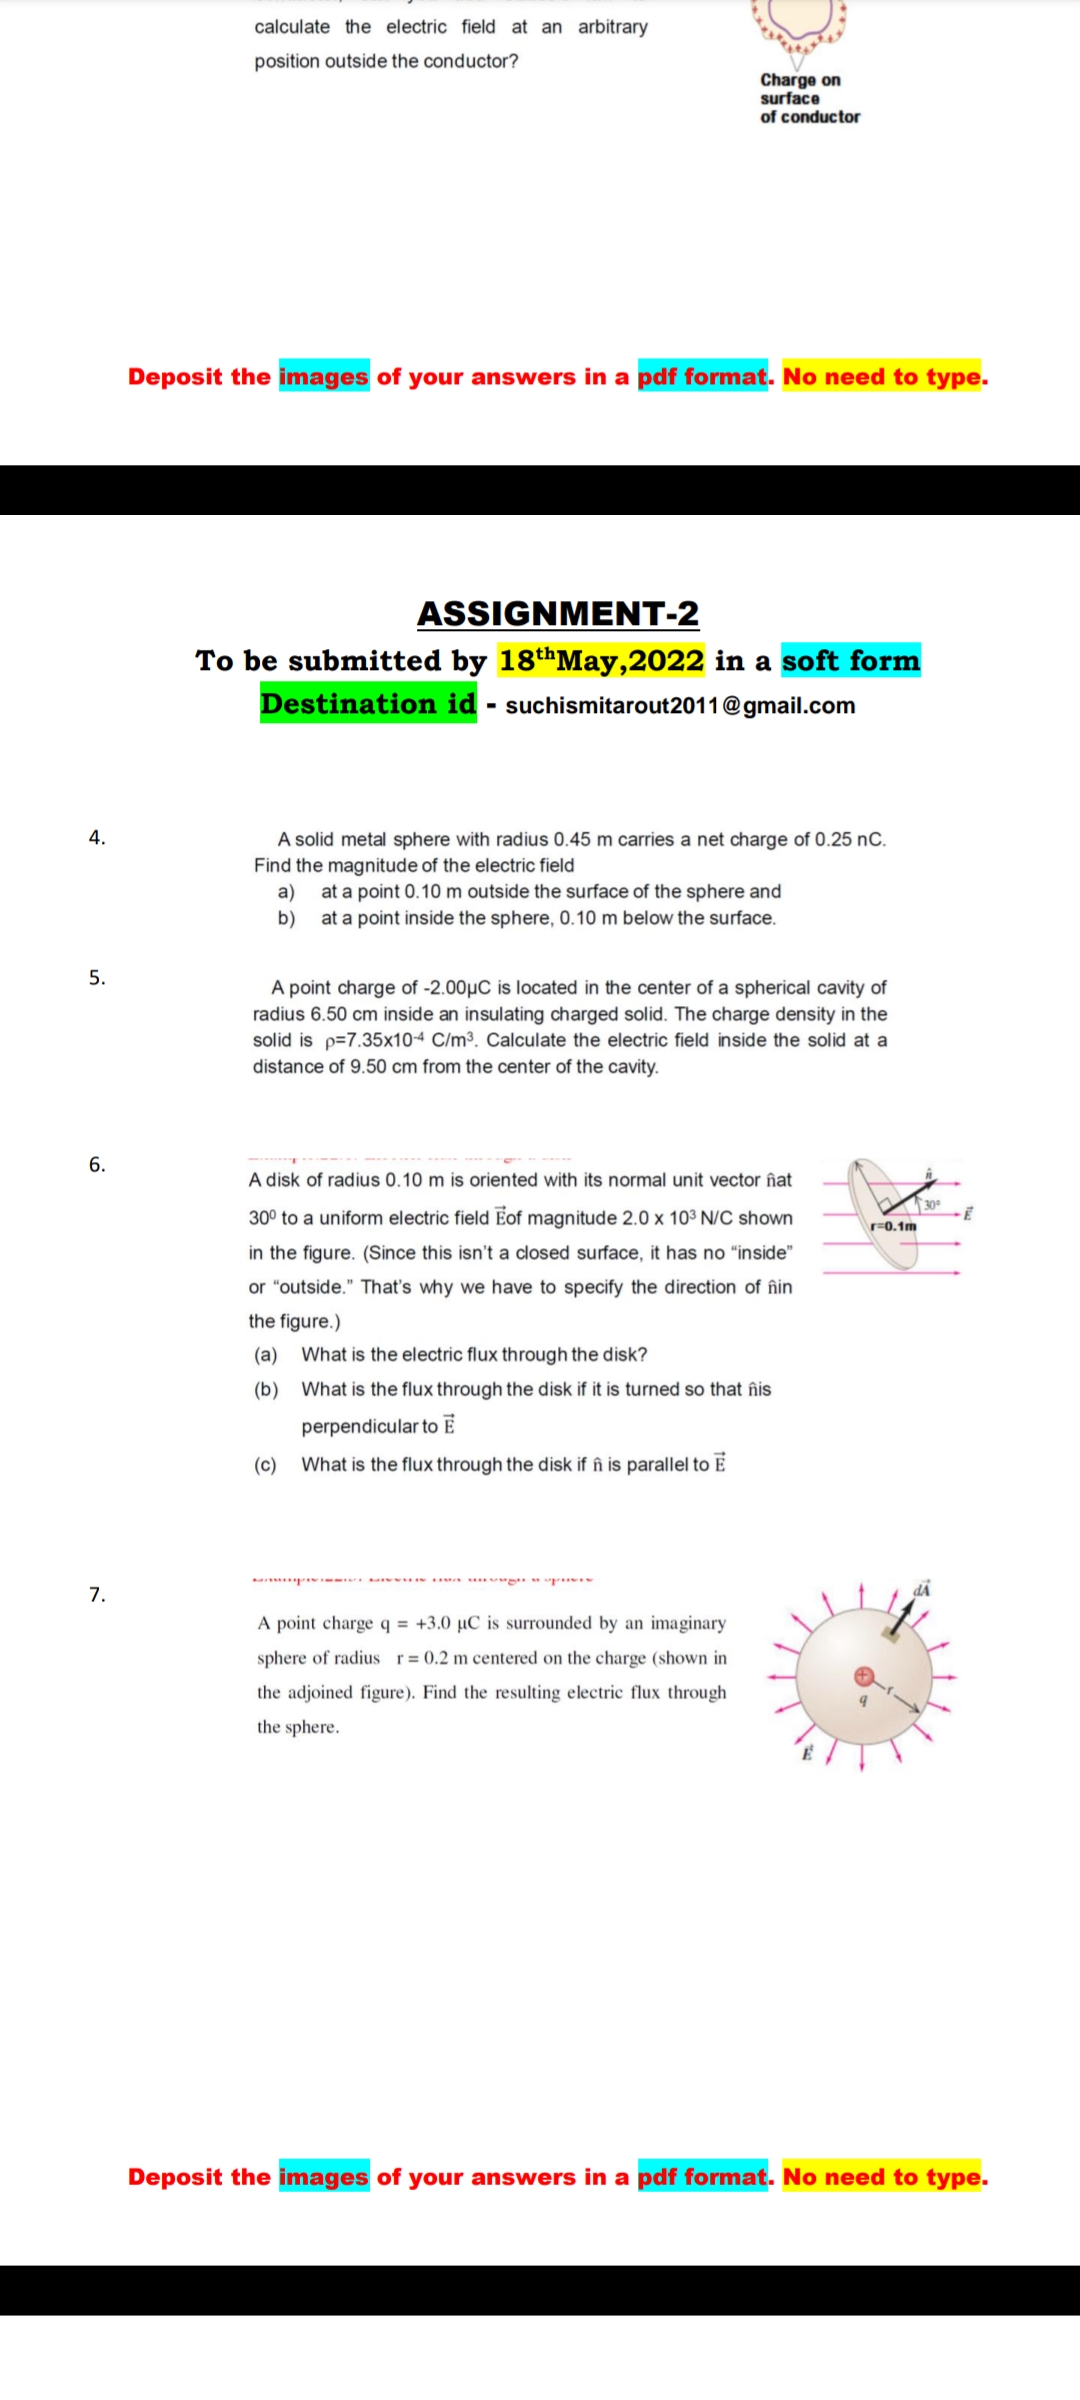 calculate the electric field at an arbitrary
position outside the conductor?
Charge on
surface
of conductor
Deposit the images of your answers in a pdf format. No need to type.
ASSIGNMENT-2
To be submitted by 18thMay,2022 in a soft form
Destination id - suchismitarout2011@gmail.com
4.
A solid metal sphere with radius 0.45 m carries a net charge of 0.25 nC.
Find the magnitude of the electric field
a) at a point 0.10 m outside the surface of the sphere and
b) at a point inside the sphere, 0.10 m below the surface.
5.
A point charge of -2.00µC is located in the center of a spherical cavity of
radius 6.50 cm inside an insulating charged solid. The charge density in the
solid is p=7.35x10-4 C/m³. Calculate the electric field inside the solid at a
distance of 9.50 cm from the center of the cavity.
6.
A disk of radius 0.10 m is oriented with its normal unit vector îñat
30
30° to a uniform electric field Eof magnitude 2.0 x 10³ N/C shown
r=0,1m
in the figure. (Since this isn't a closed surface, it has no "inside"
or "outside." That's why we have to specify the direction of îñin
the figure.)
(a)
What is the electric flux through the disk?
(b)
What is the flux through the disk if it is turned so that înis
perpendicular to E
(c)
What is the flux through the disk if în is parallel to E
7.
A point charge q = +3.0 µC is surrounded by an imaginary
sphere of radius r= 0.2 m centered on the charge (shown in
the adjoined figure). Find the resulting electric flux through
the sphere.
Deposit the images of your answers in a pdf format. No need to type.
